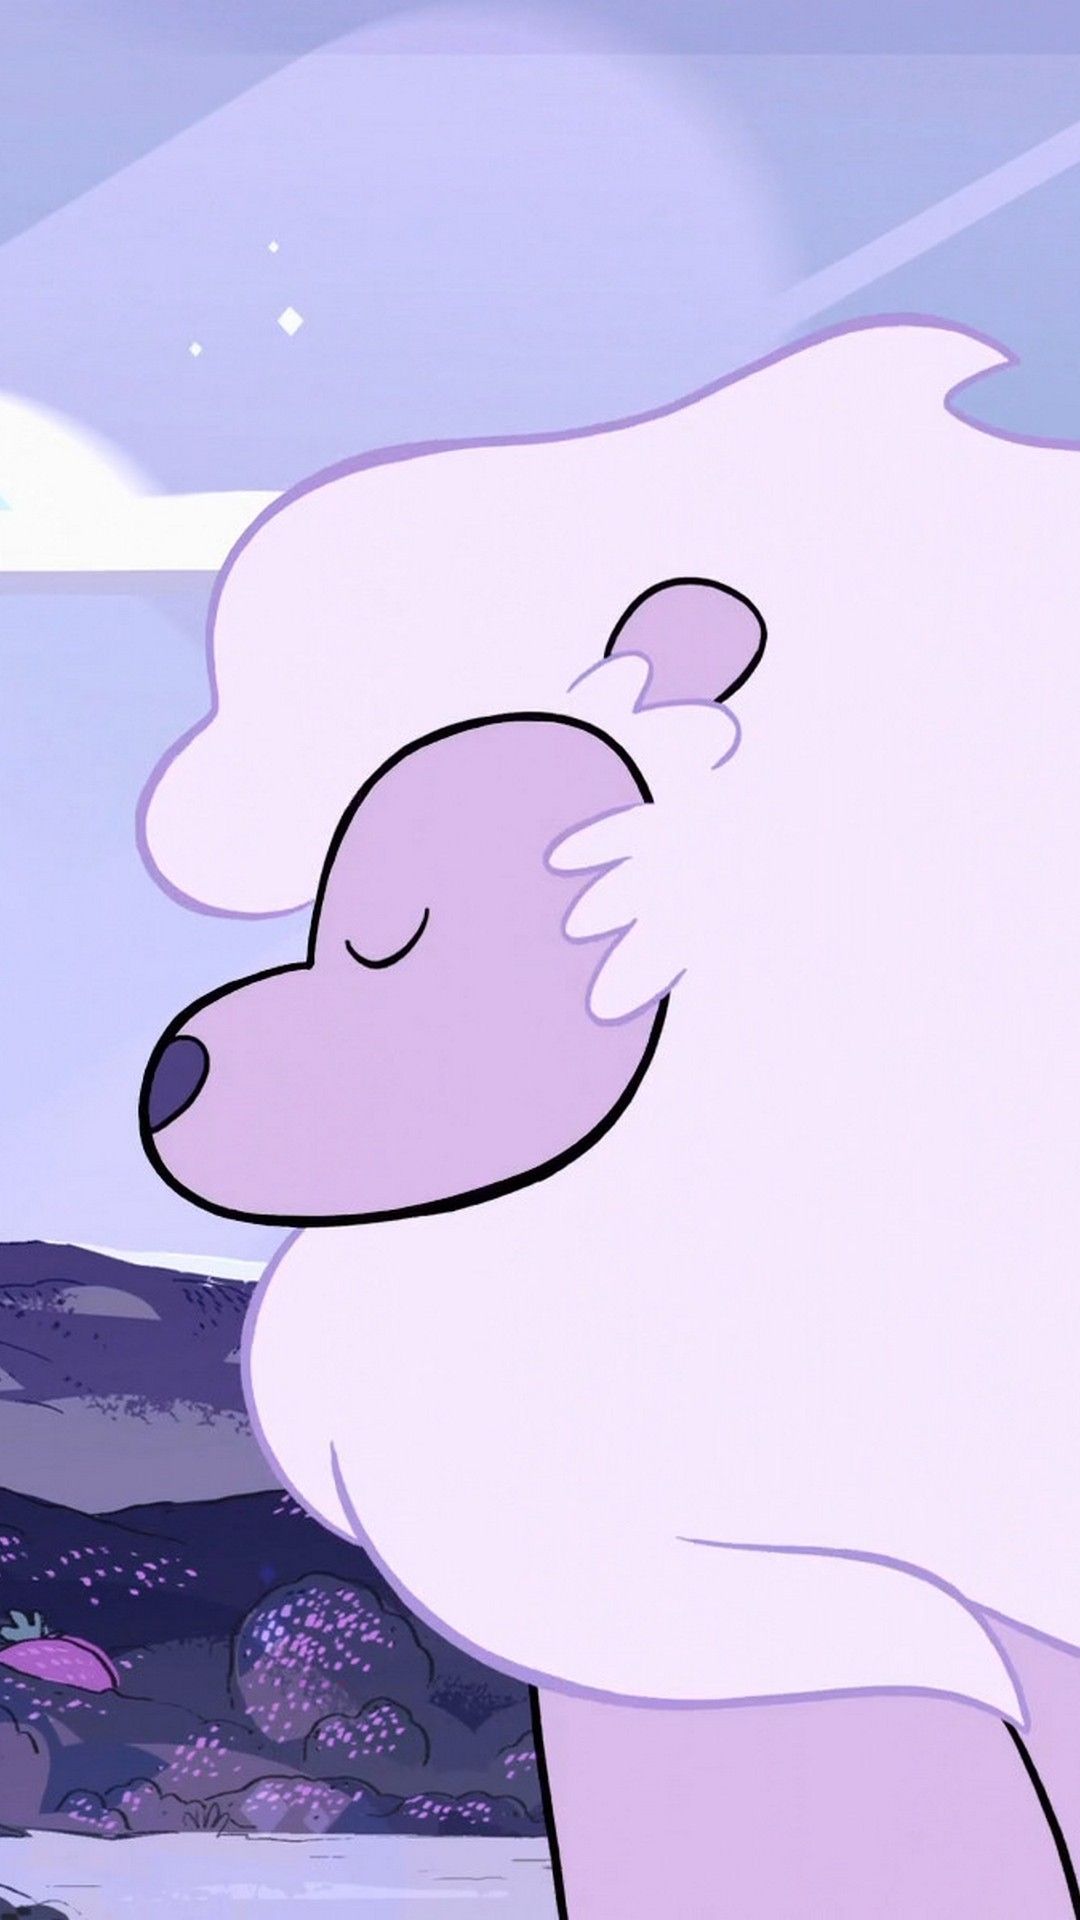 Steven Universe Wallpaper Android Android Wallpaper